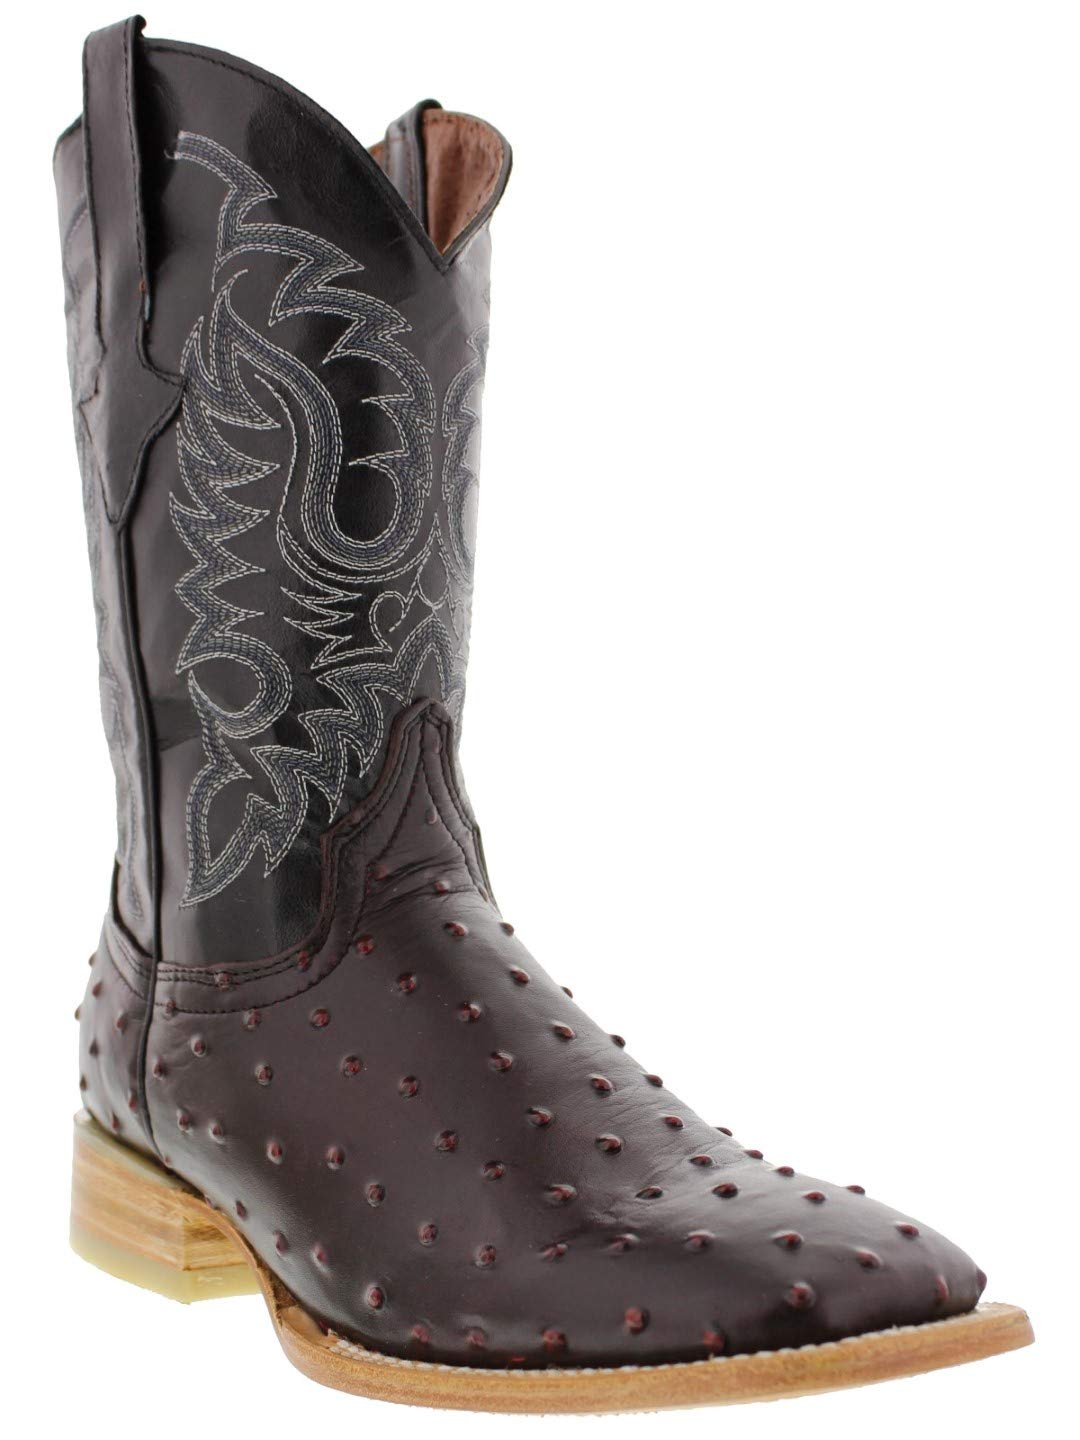 Texas Legacy Mens Black Cherry Western Leather Cowboy Boots Ostrich Quill Print